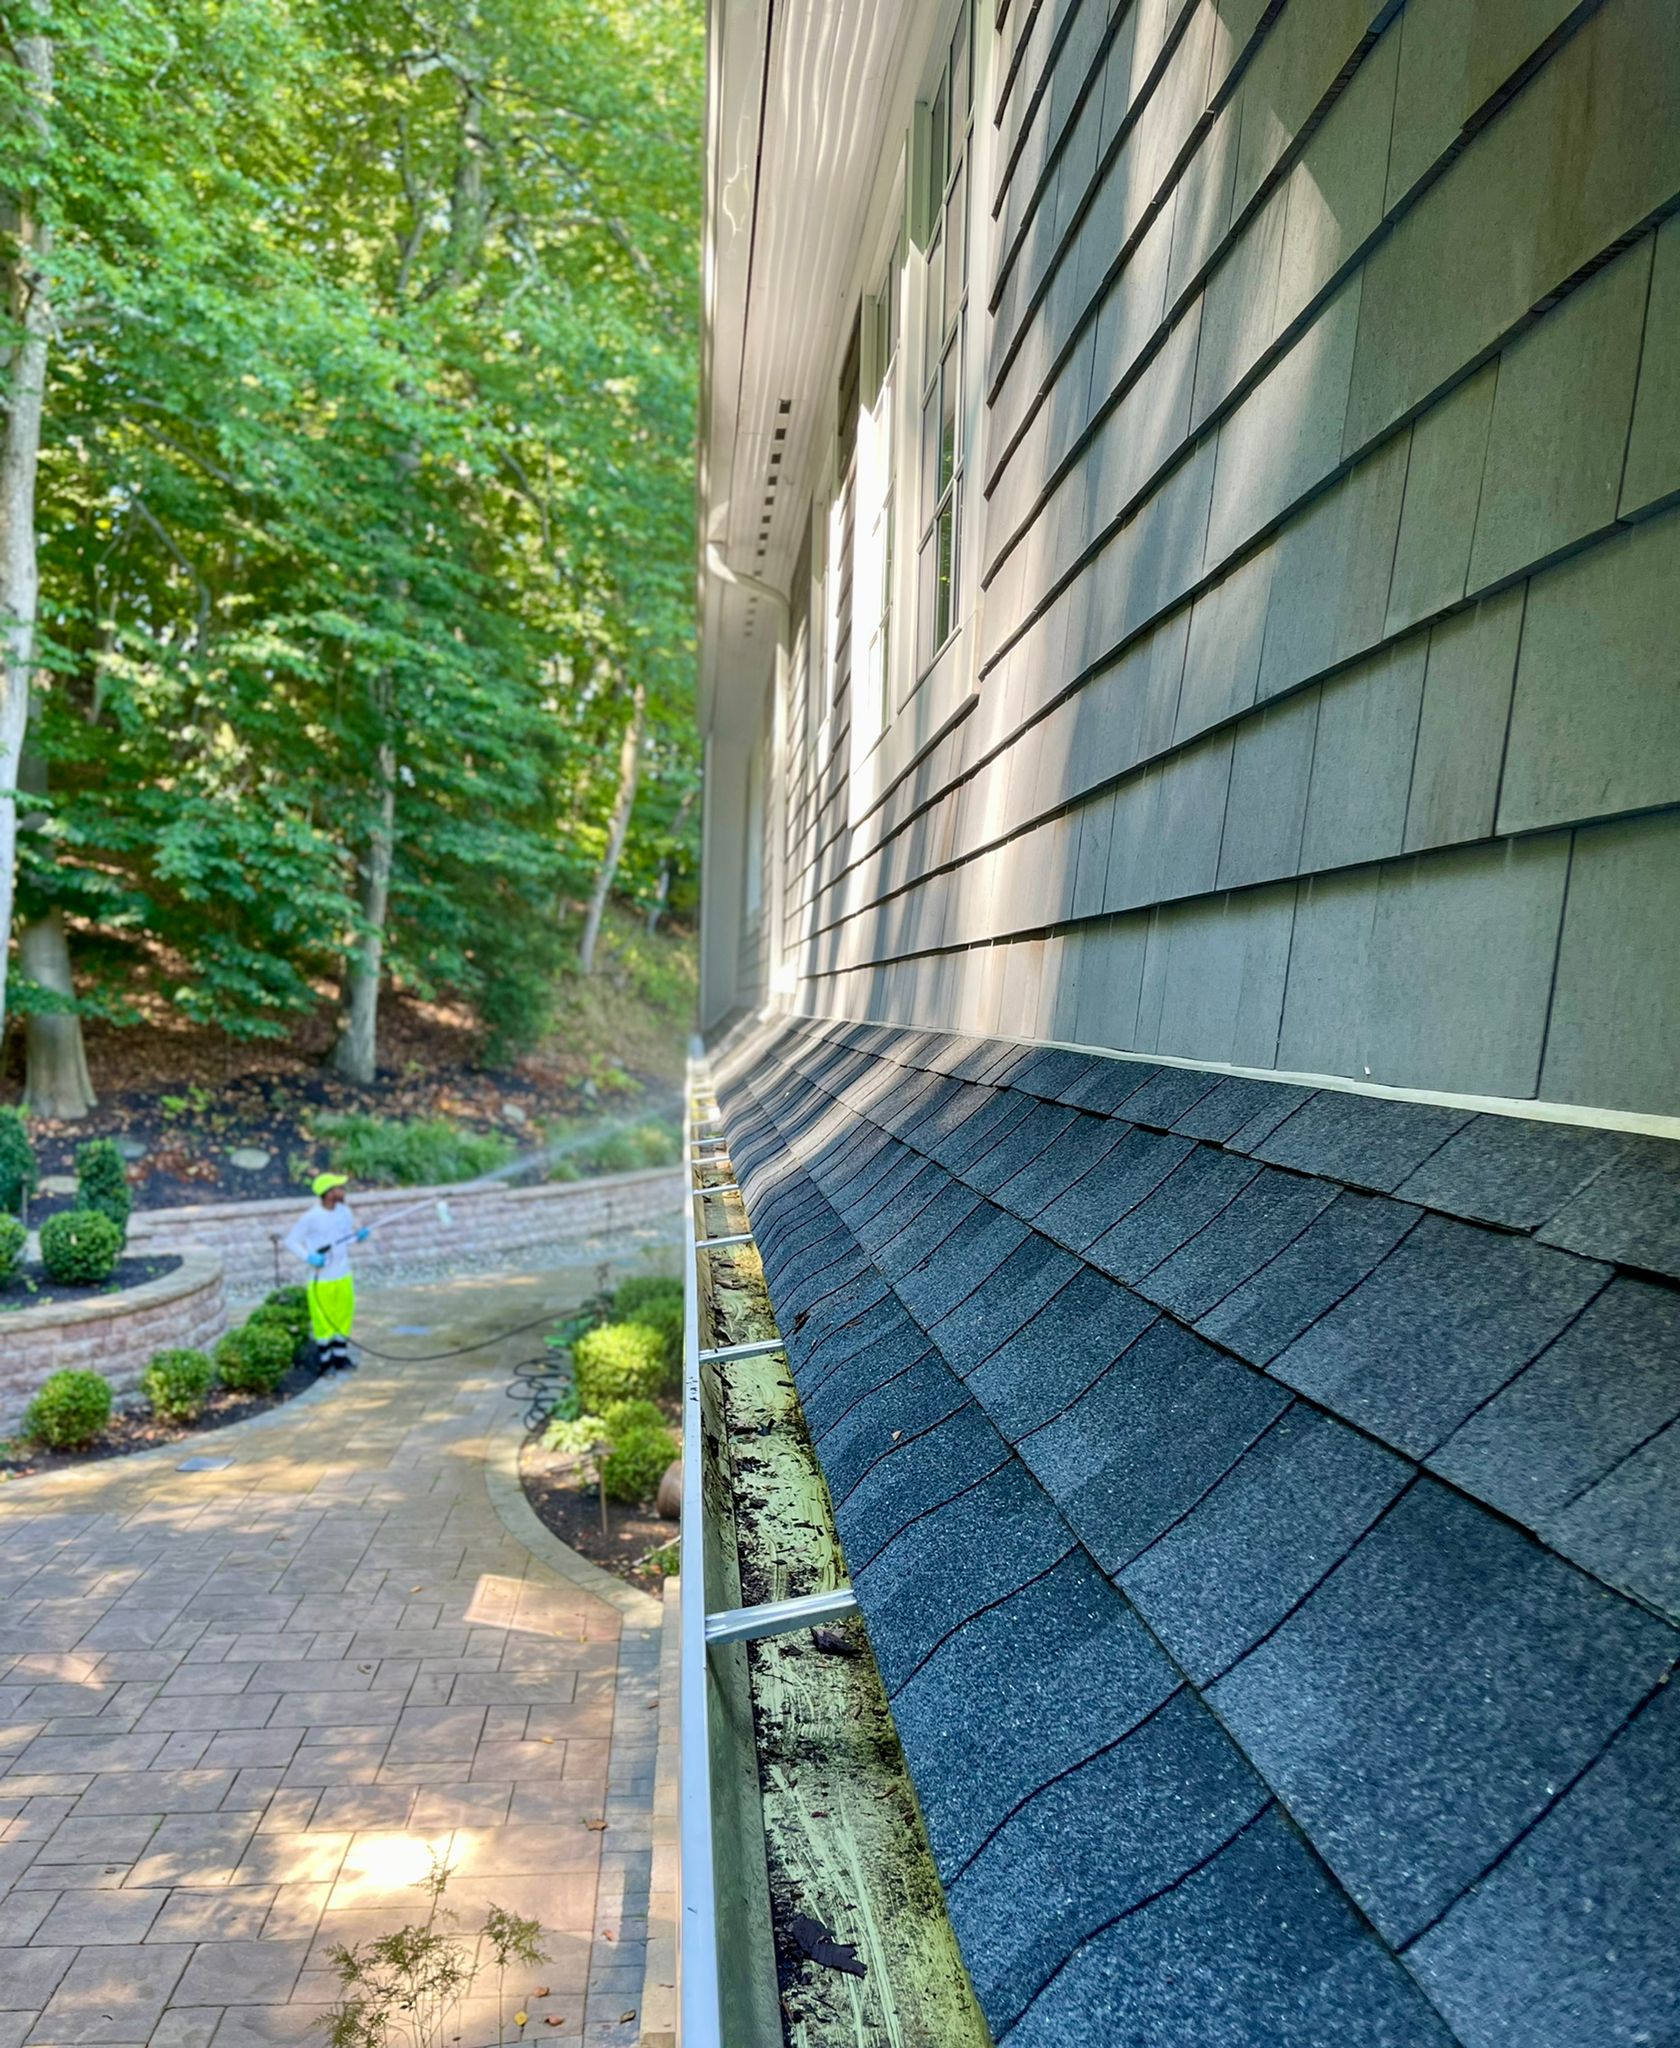 Gutter cleaning services in NJ and NY